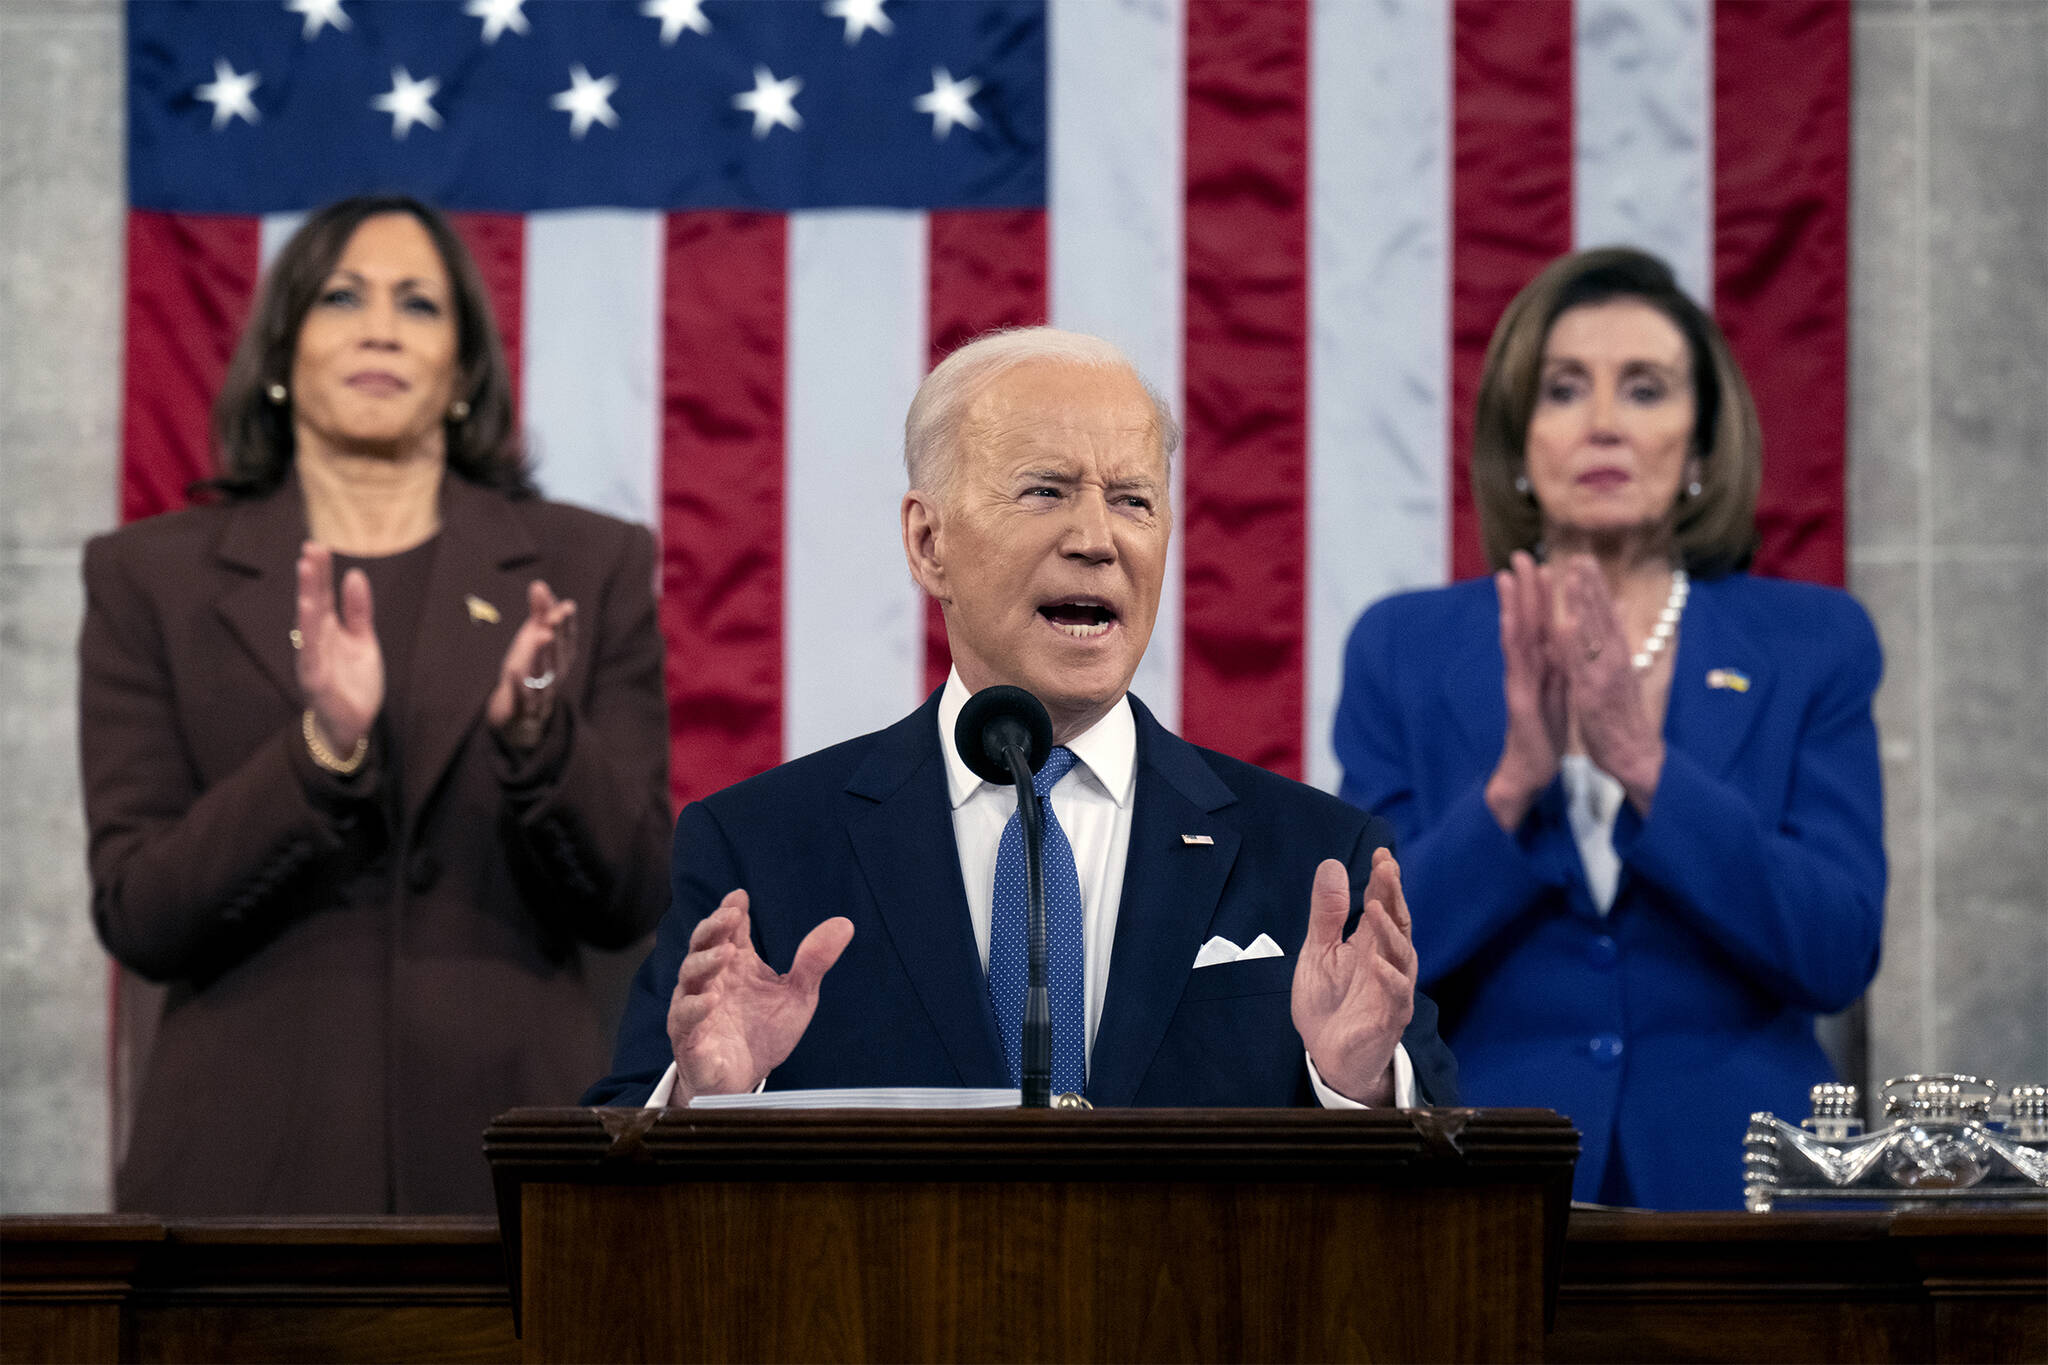 President Joe Biden delivers his State of the Union address to a joint session of Congress at the Capitol, Tuesday, March 1, 2022, in Washington. (Saul Loeb, Pool)